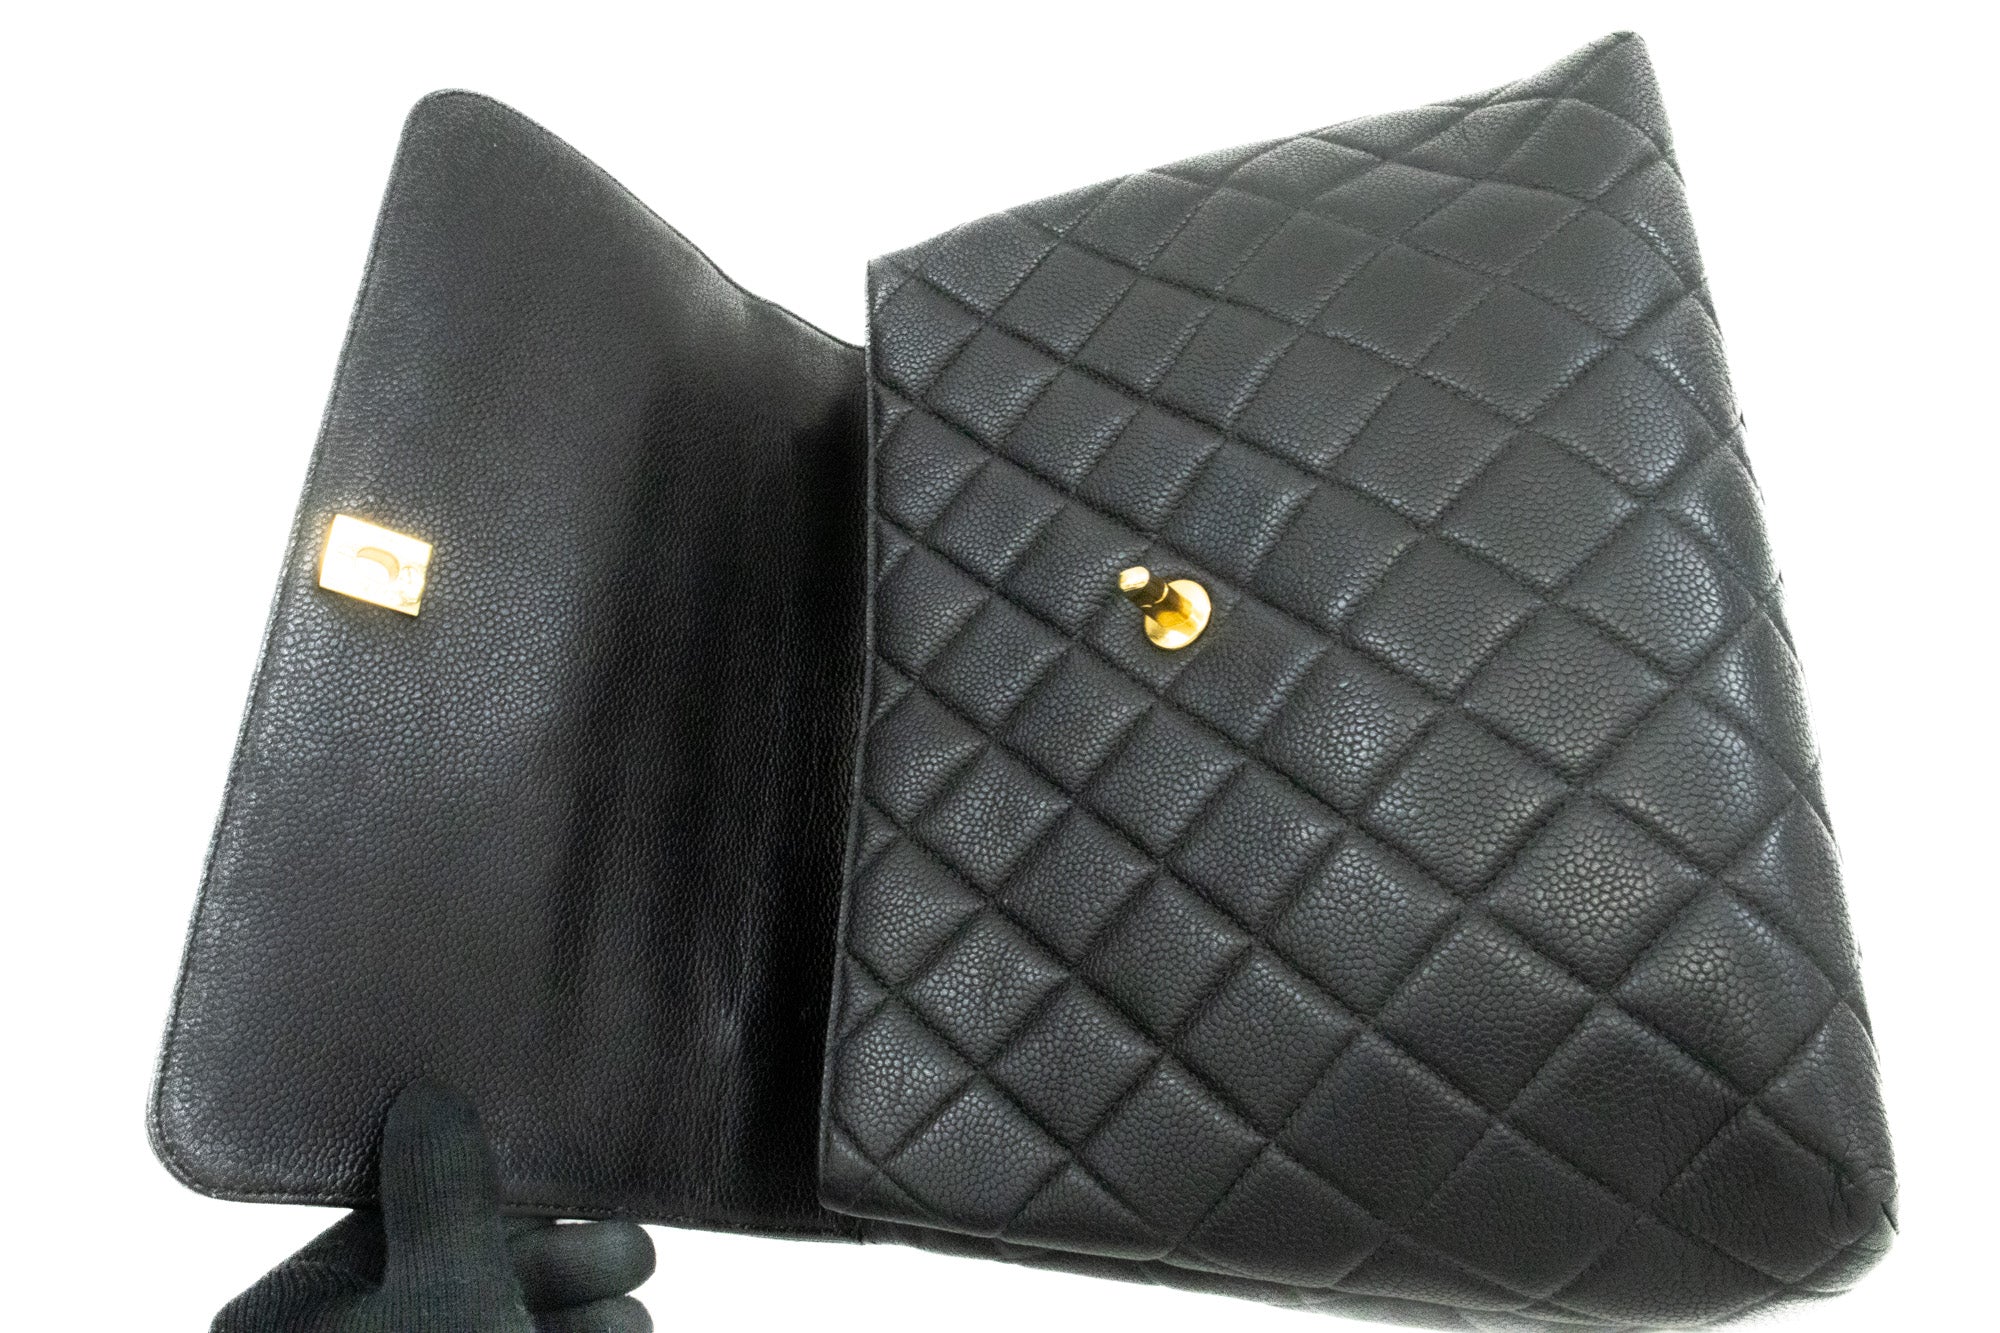 BLACK CHANEL FLAP BAG WITH GOLD HANDLE